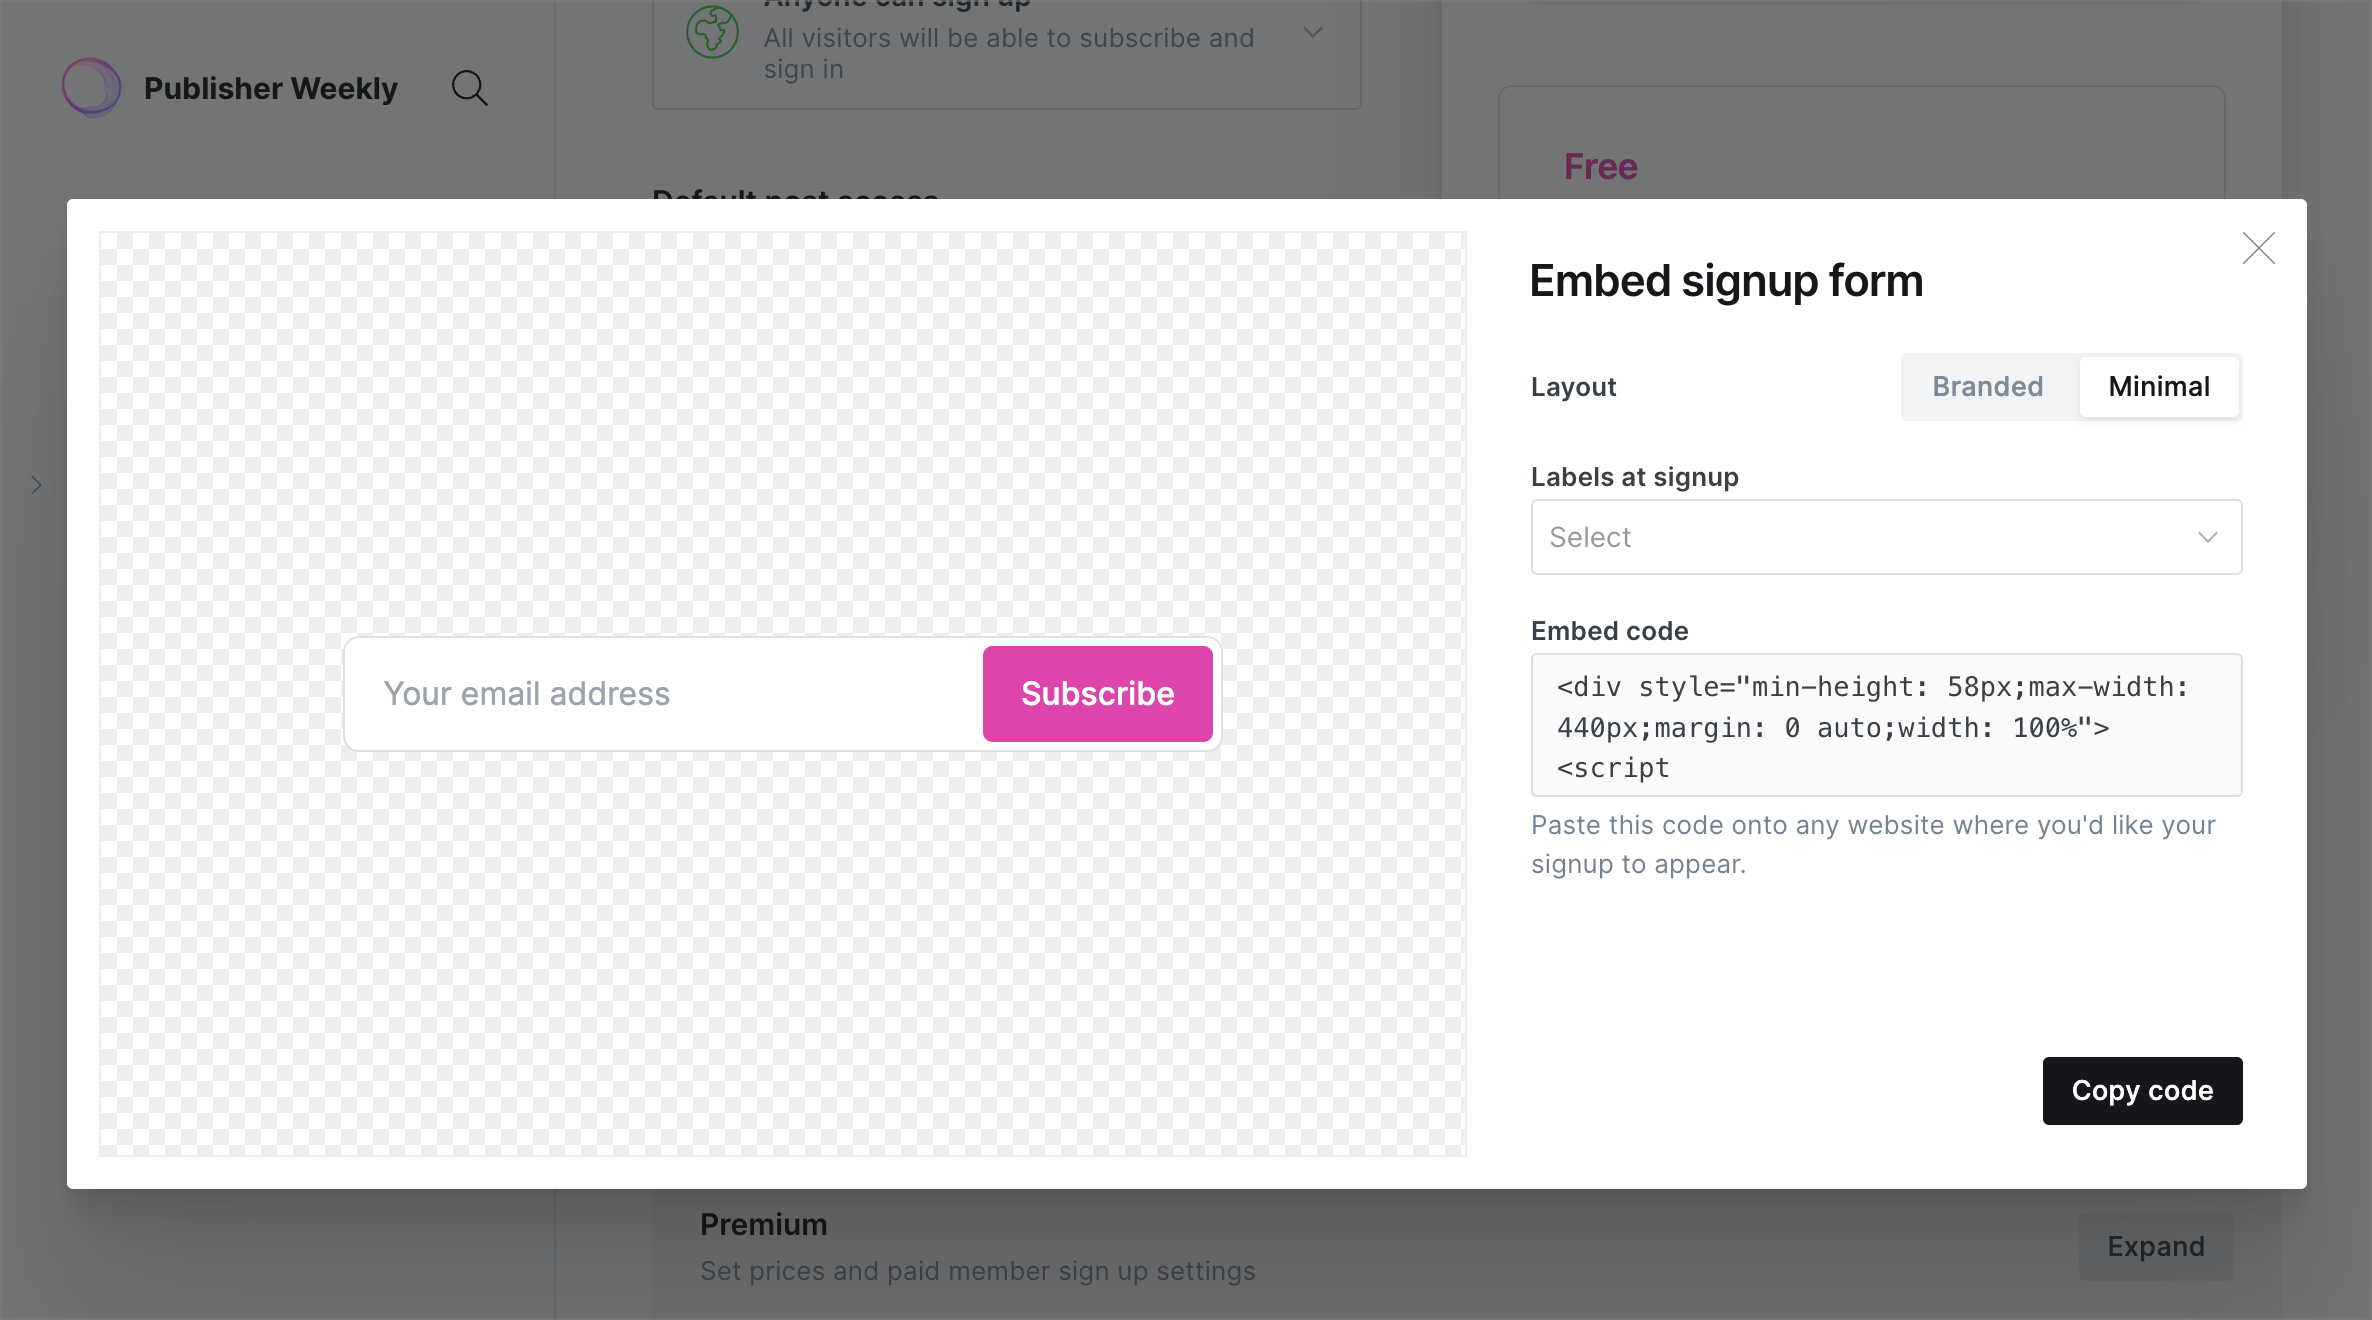 Embeddable signup forms